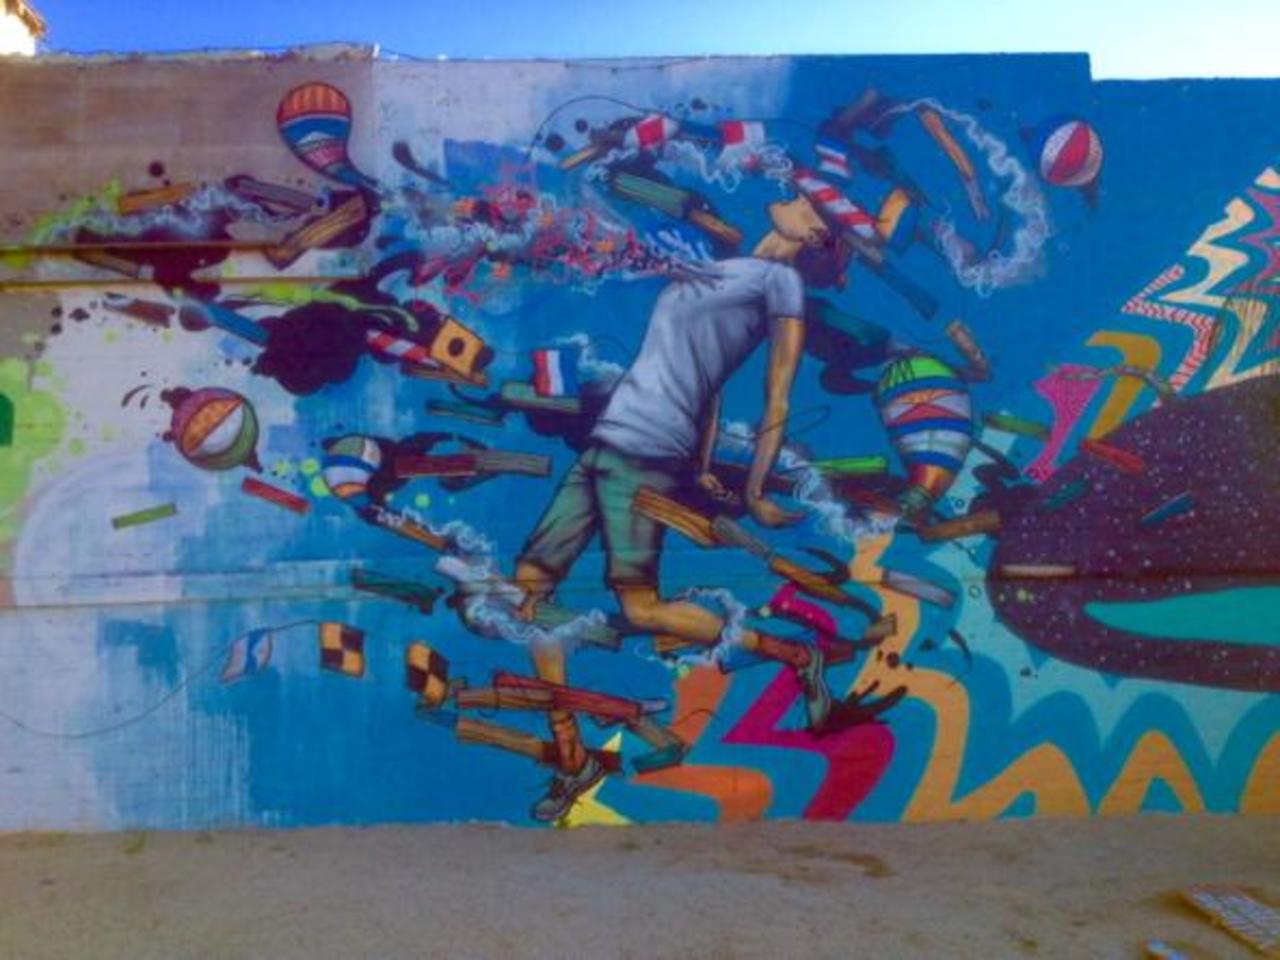 This is what an explosion of creativity looks like. #Streetart in downtown #SanDiego. #Graffiti photo by me! http://t.co/bl13AO9h8m